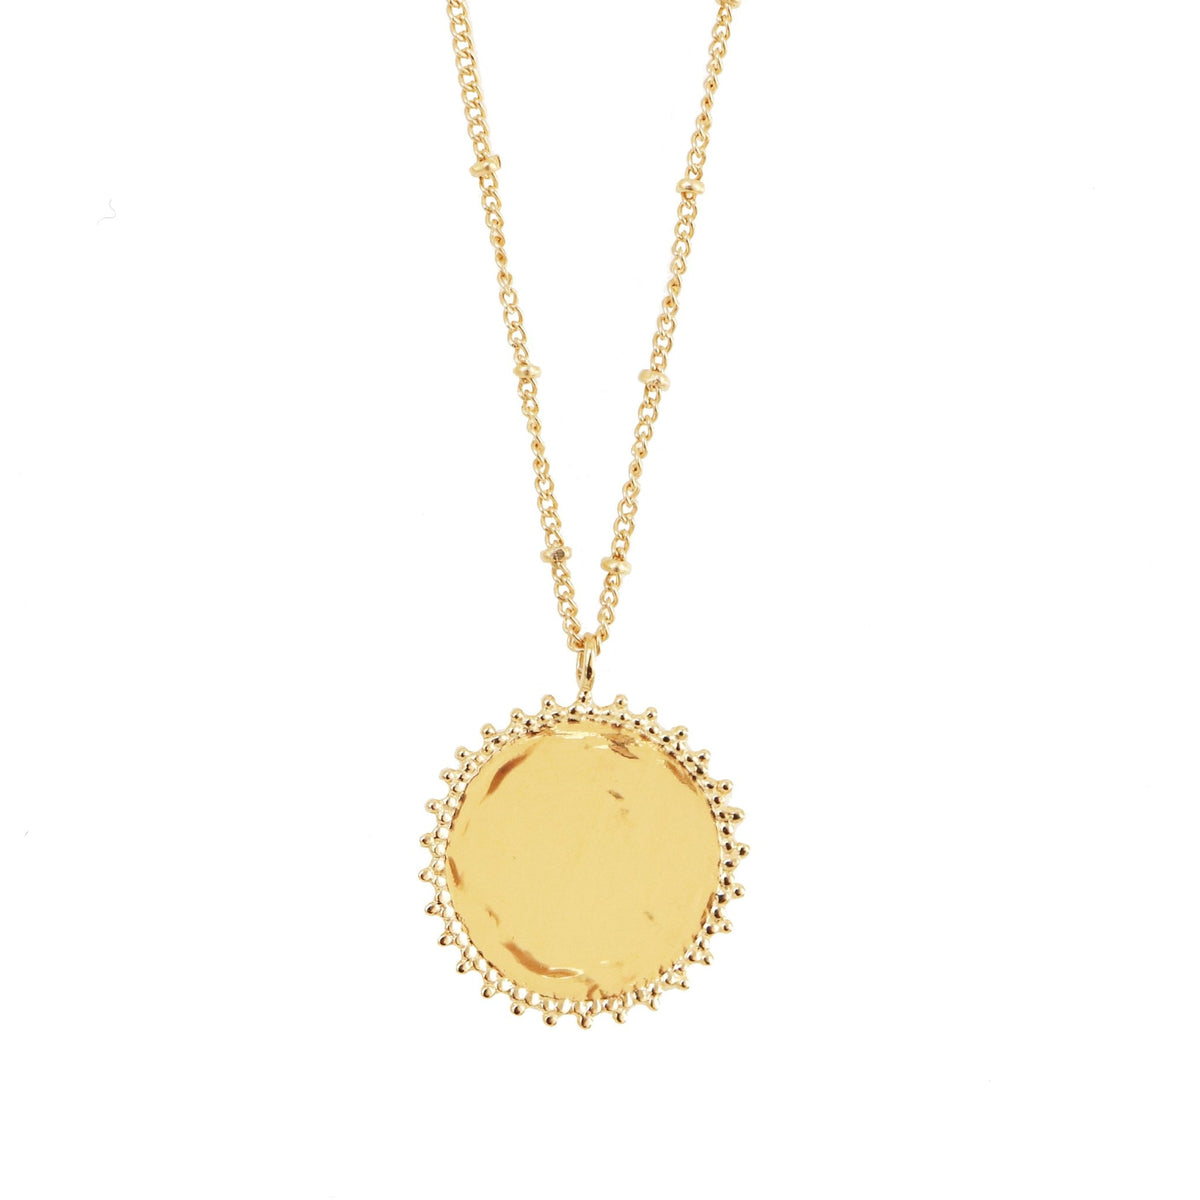 BELIEVE SOLEIL COIN PENDANT NECKLACE - GOLD - SO PRETTY CARA COTTER